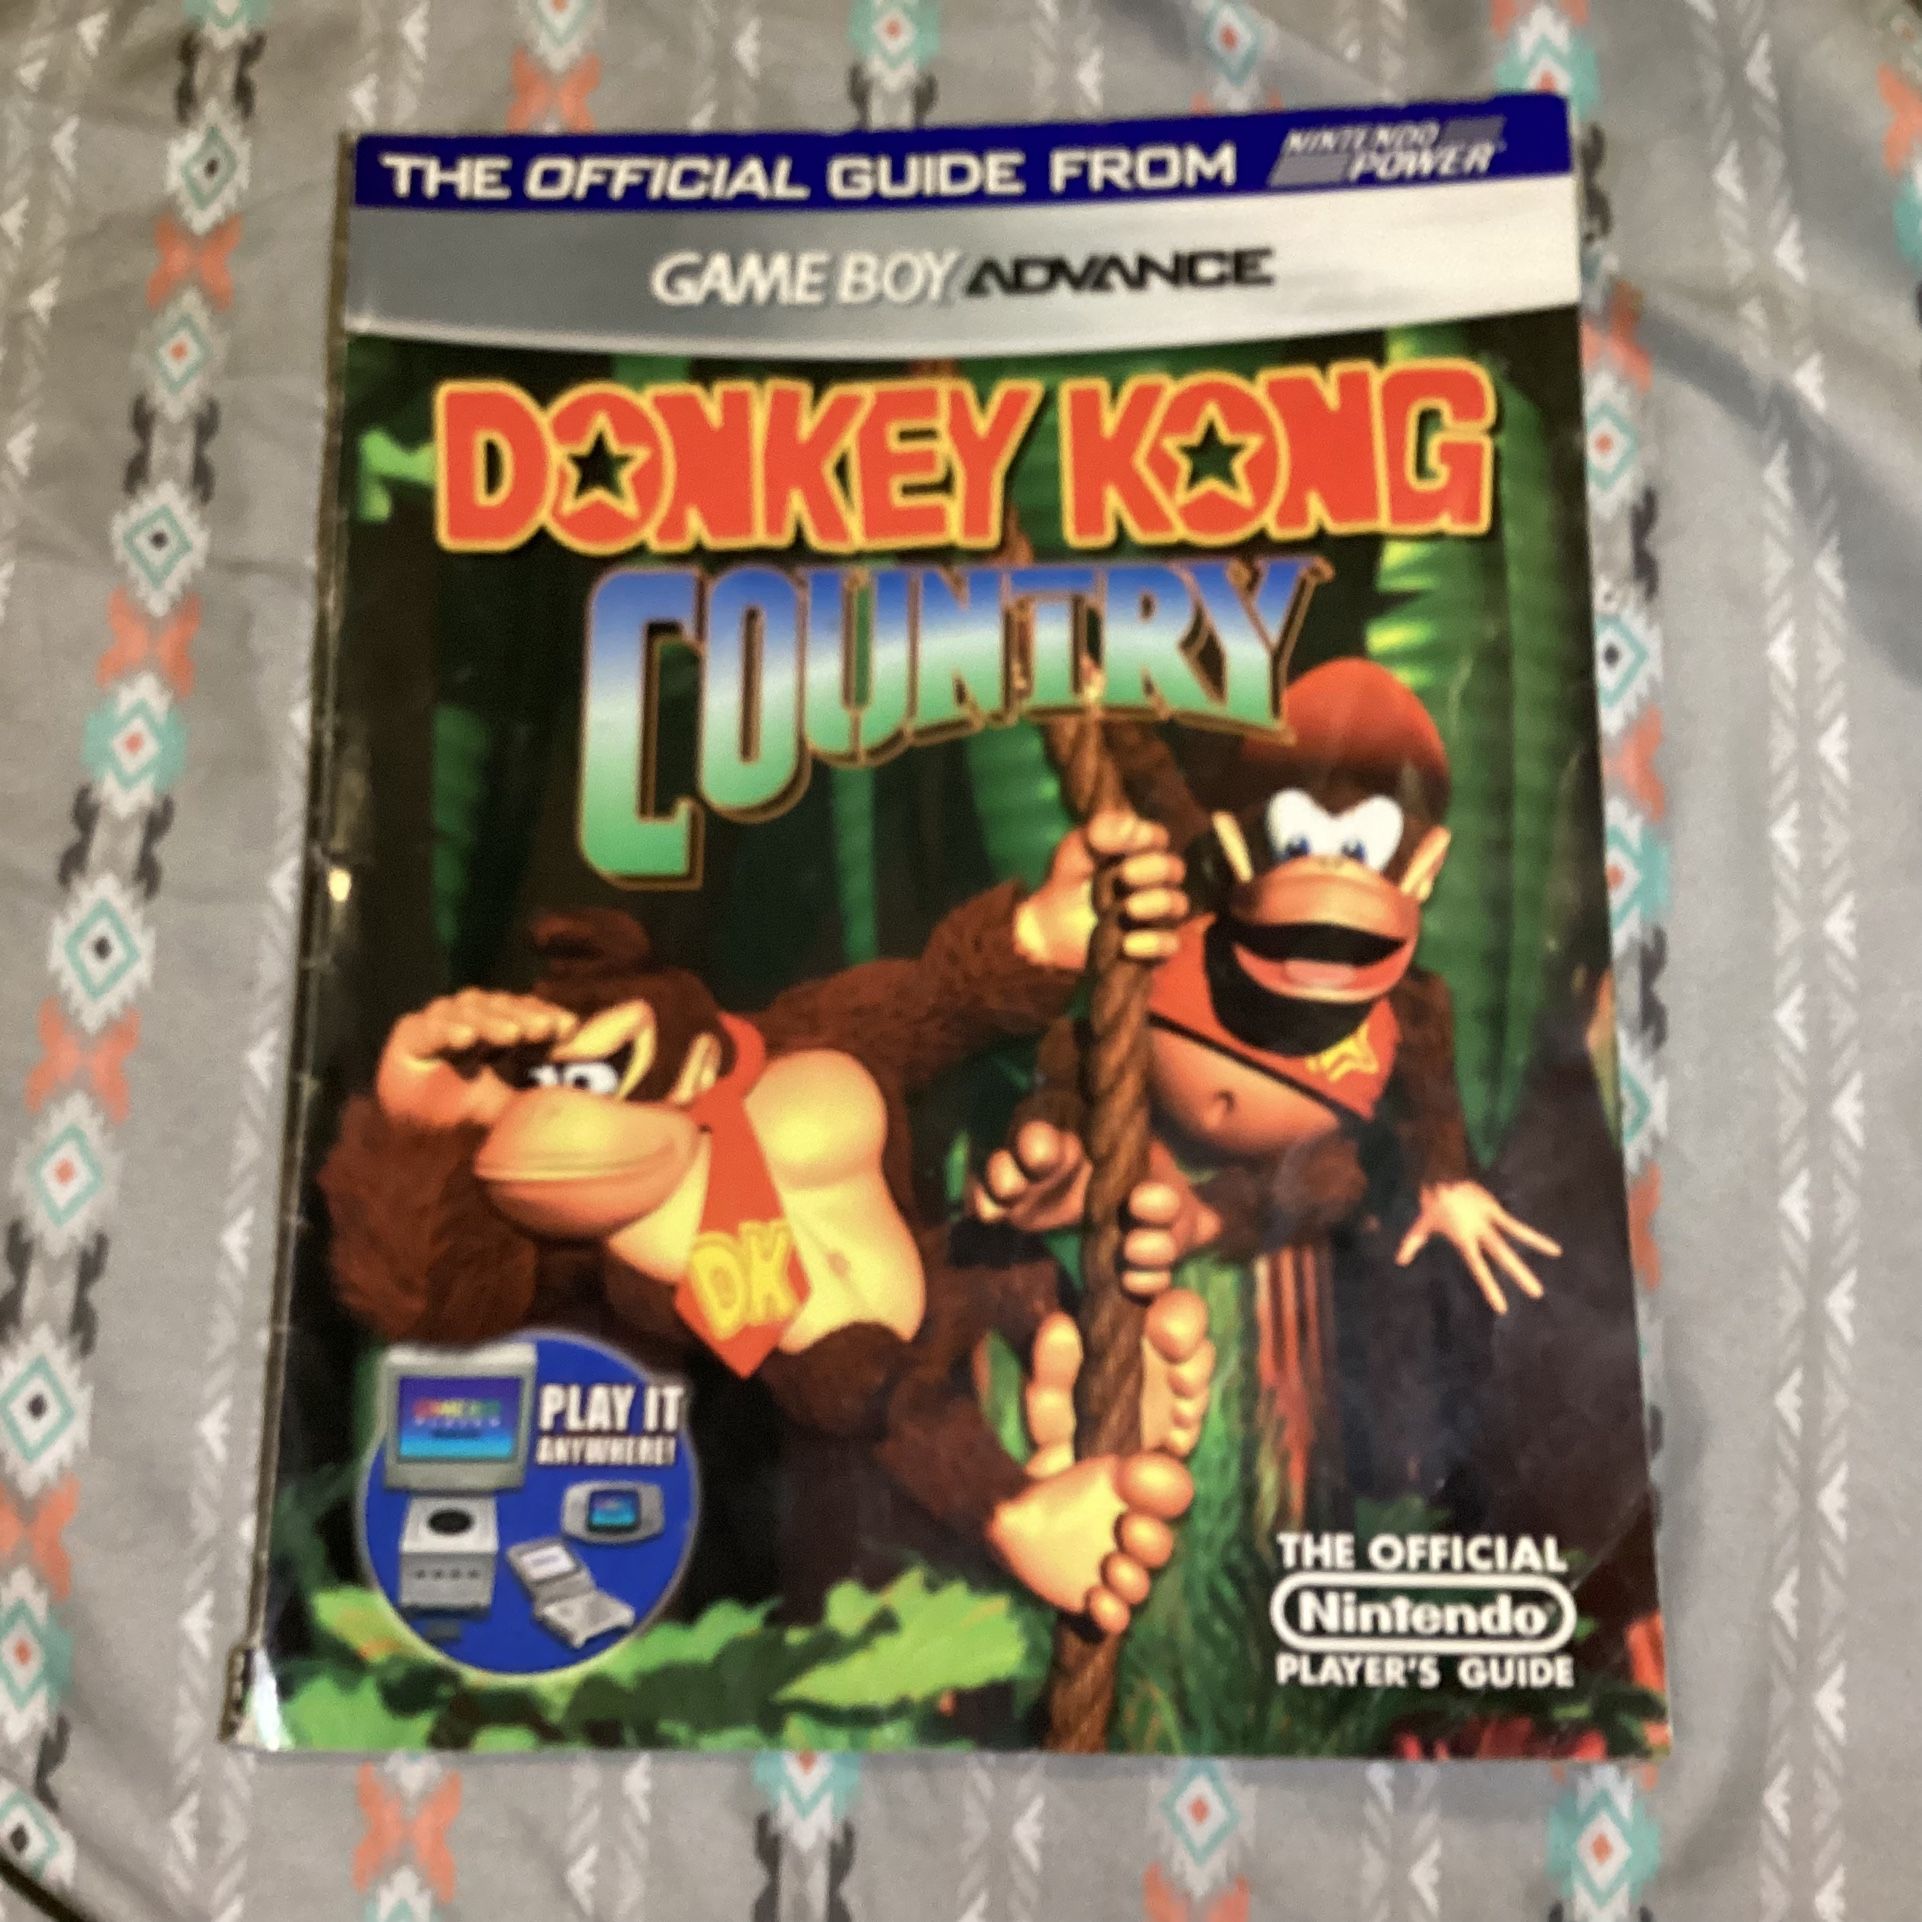 Donkey Kong Country: Nintendo Official Player's Guide for Gameboy Advance Book